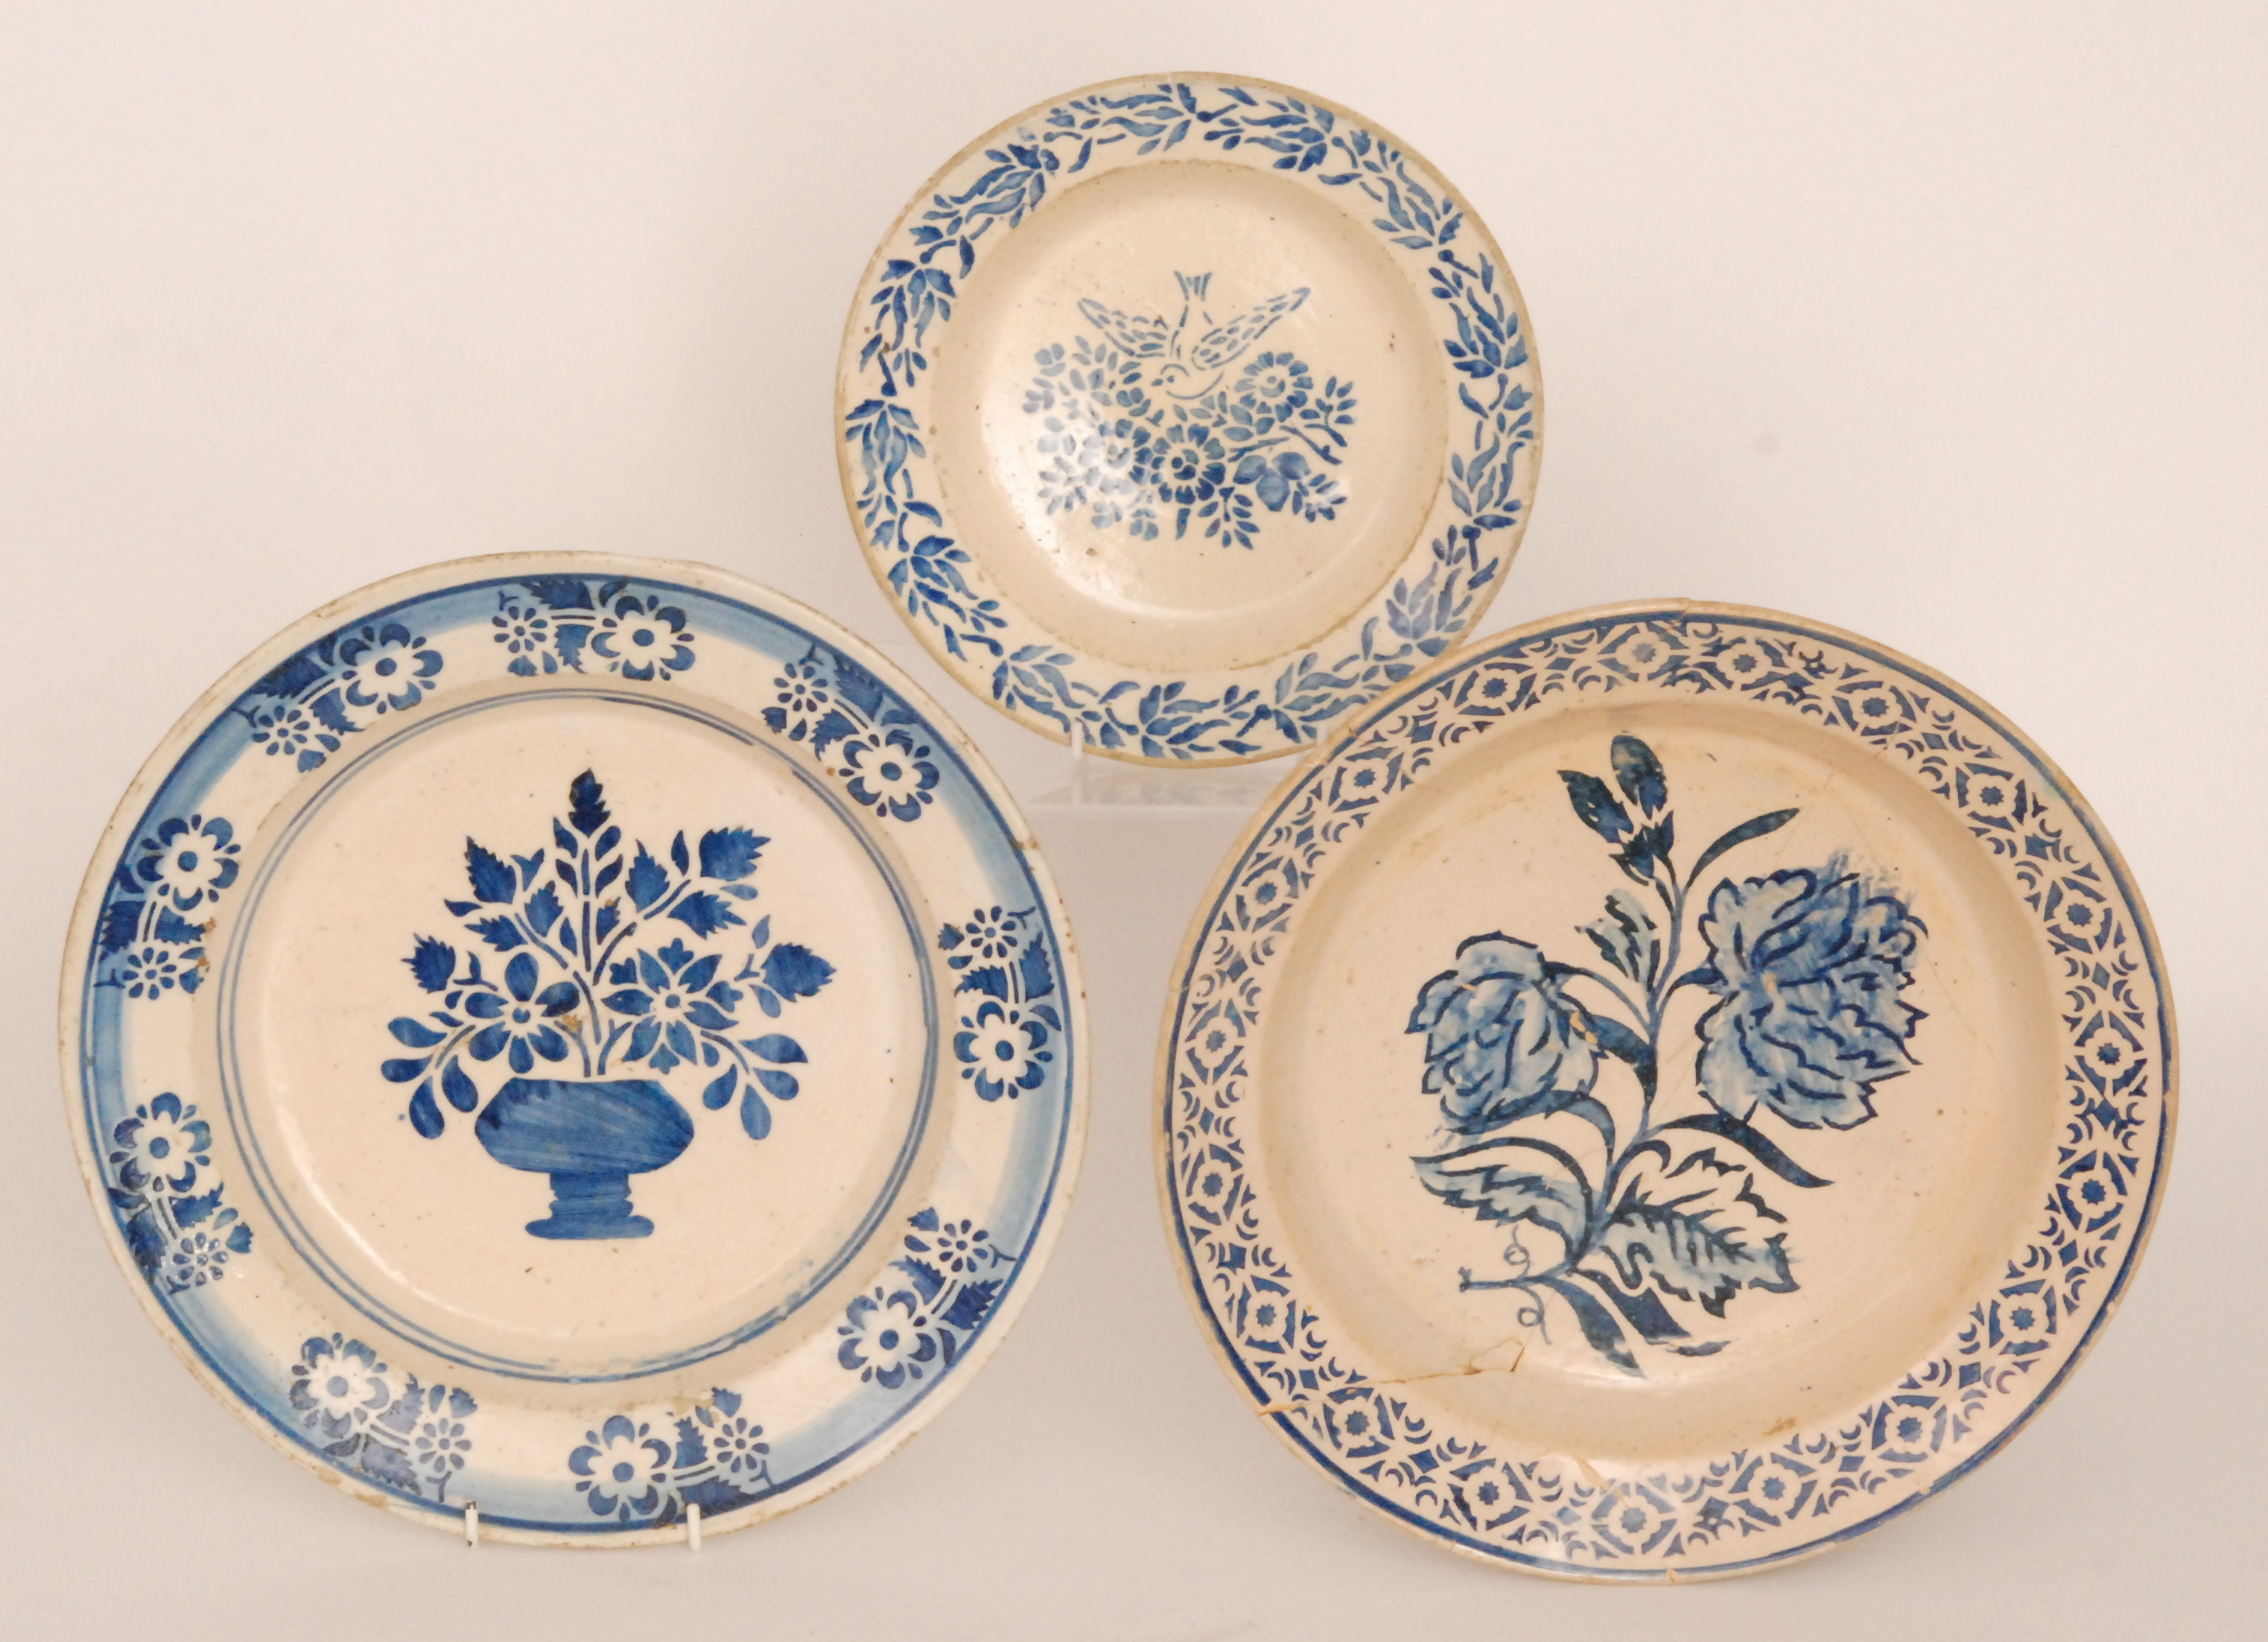 Three late 19th to early 20th Century continental tin glazed chargers each decorated in blue and